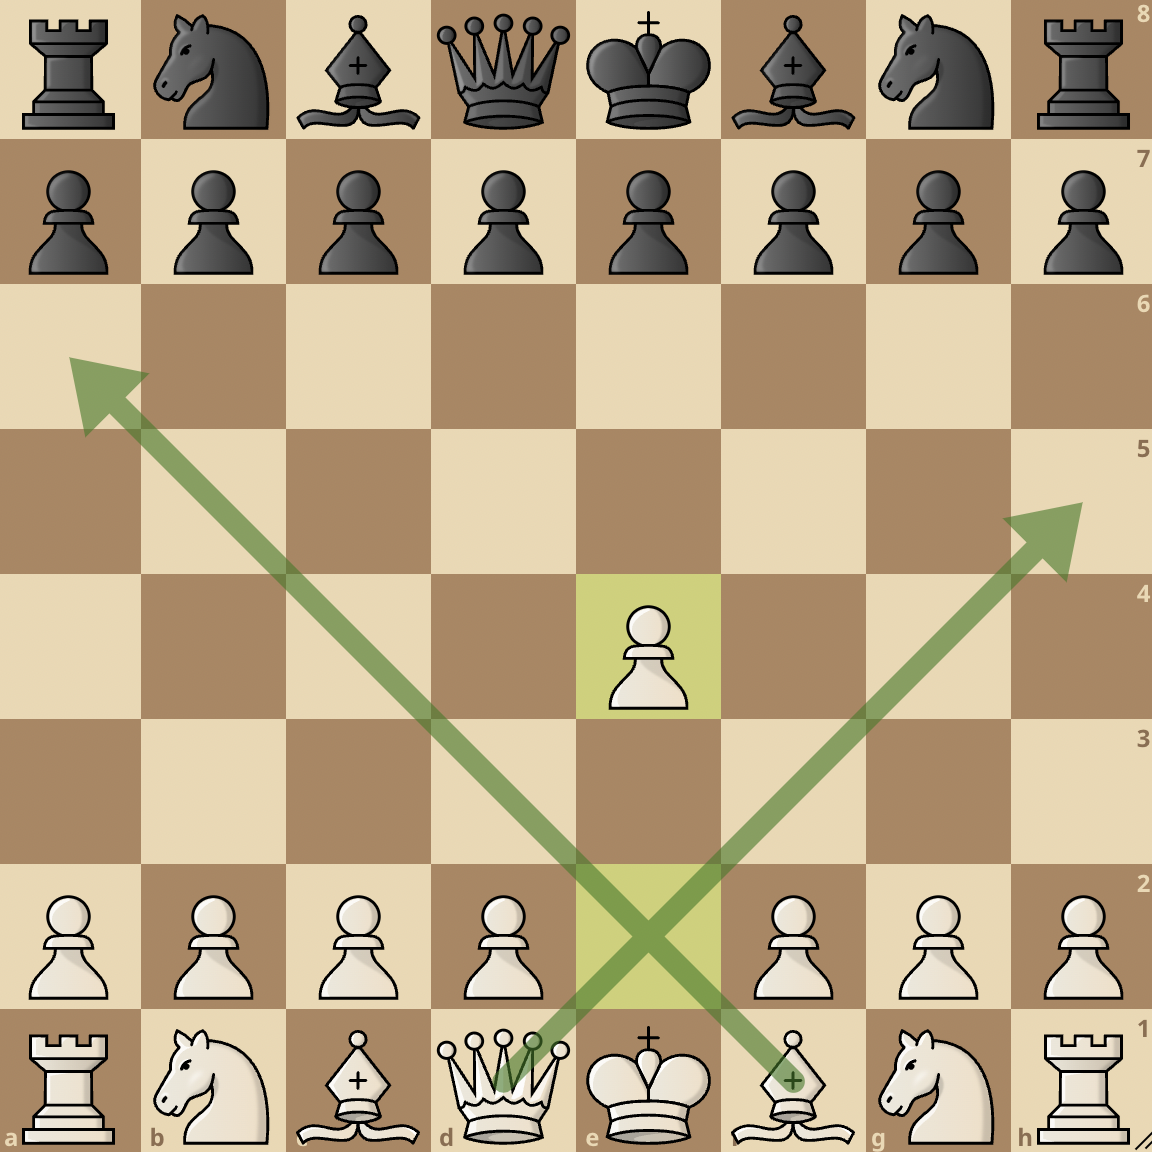 1. e4 – King's Pawn Opening